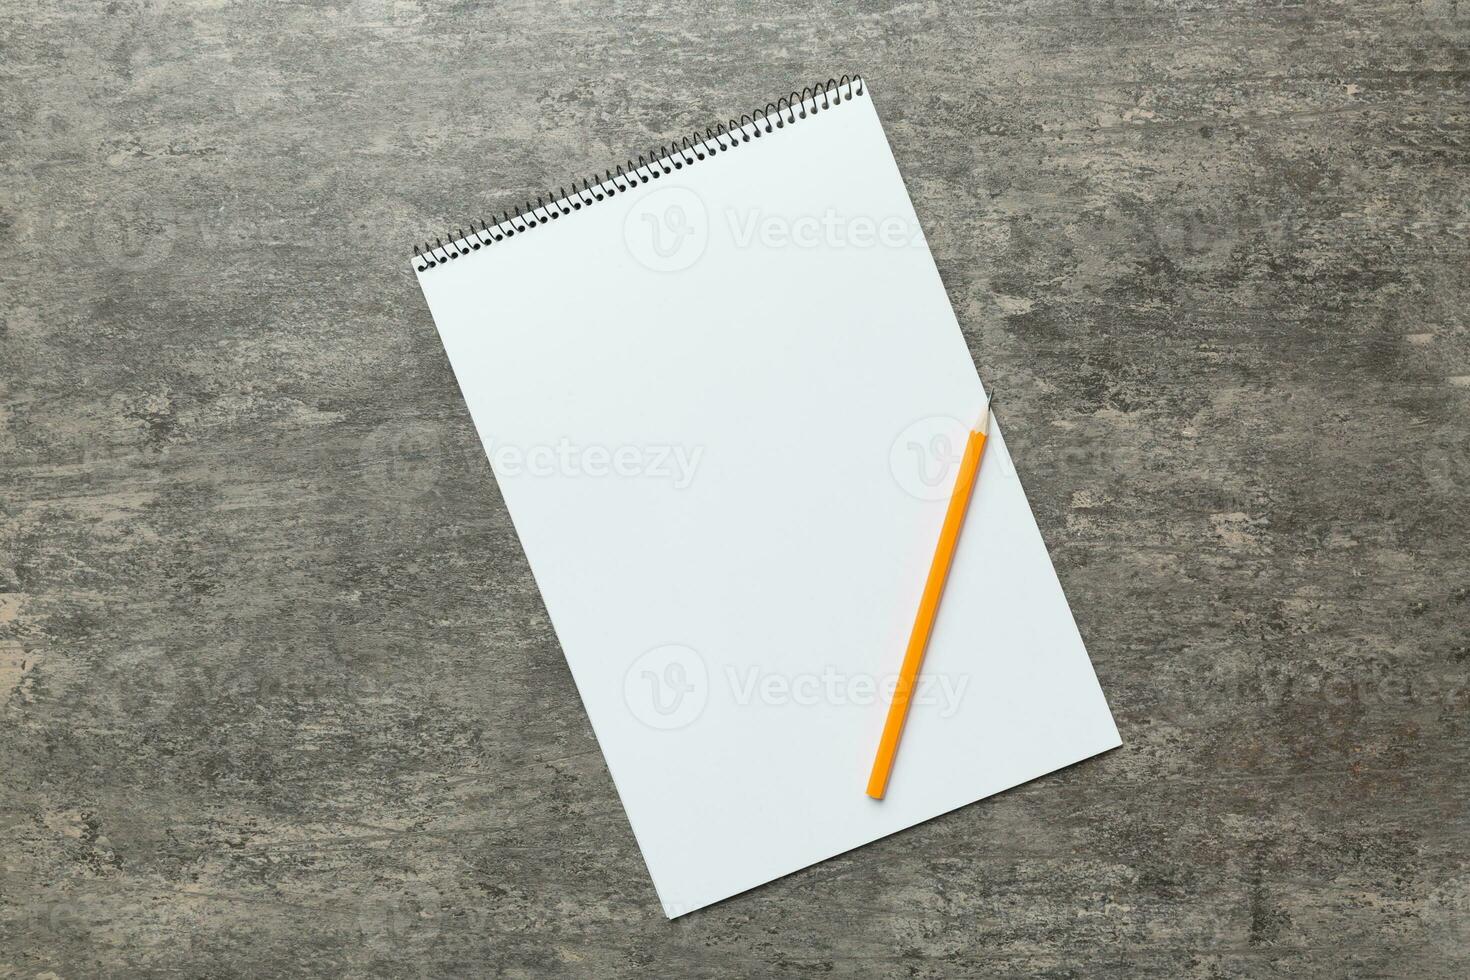 Blank notebook with pen on white background. Back to school and education concept photo